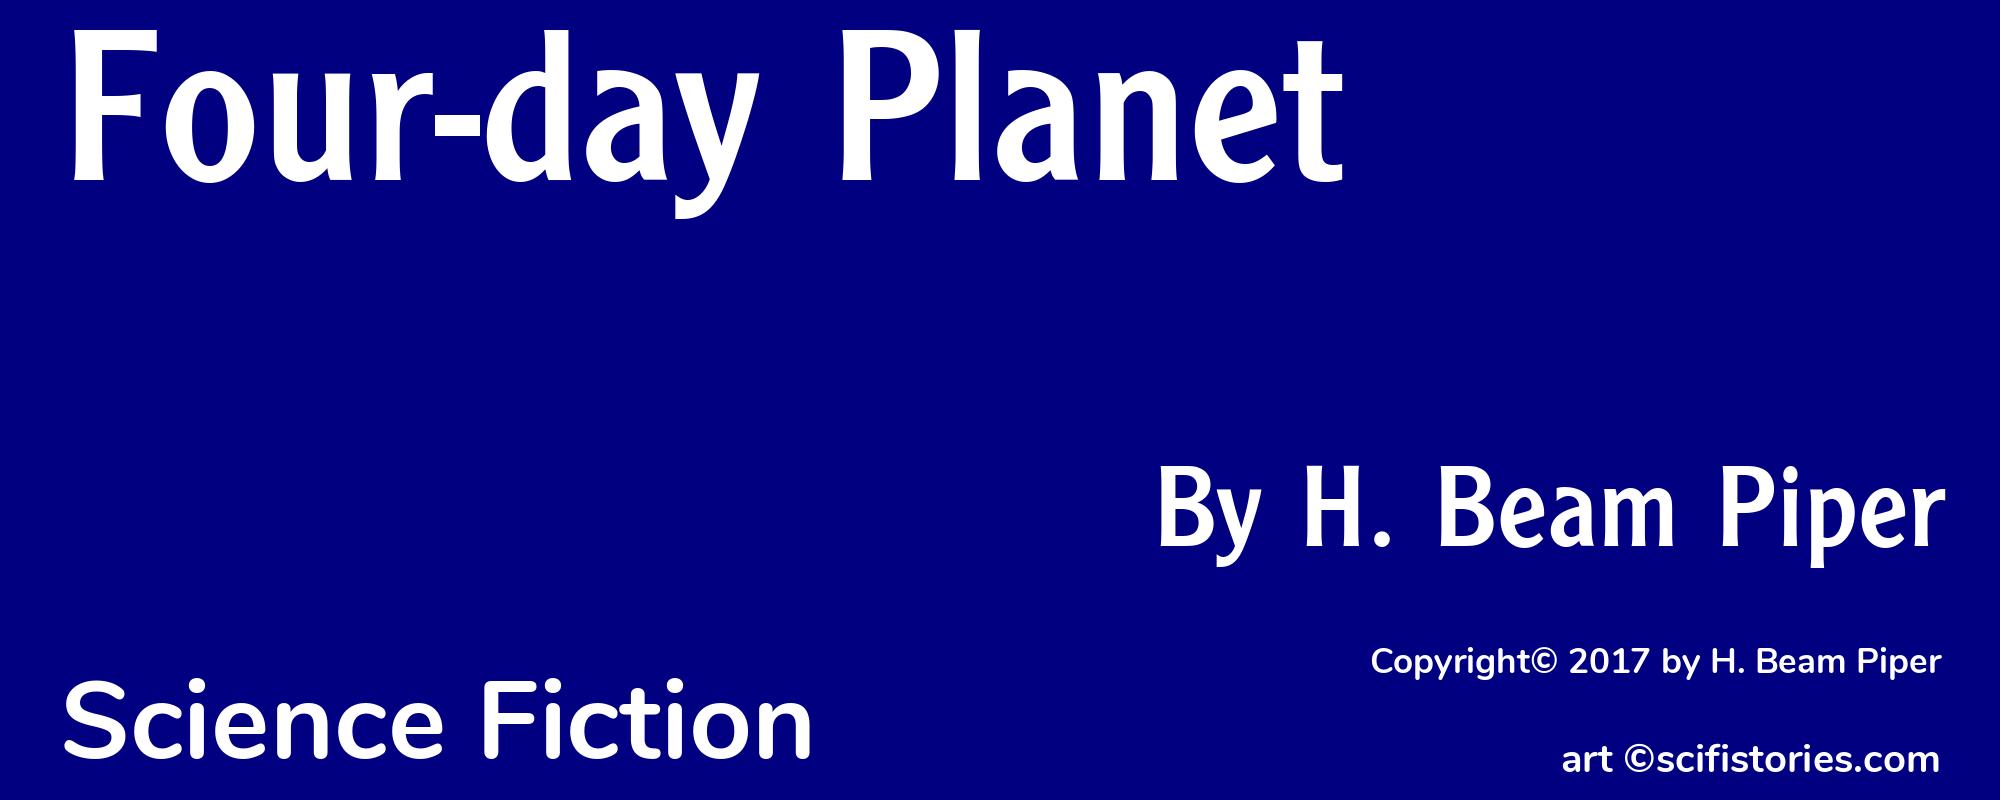 Four-day Planet - Cover